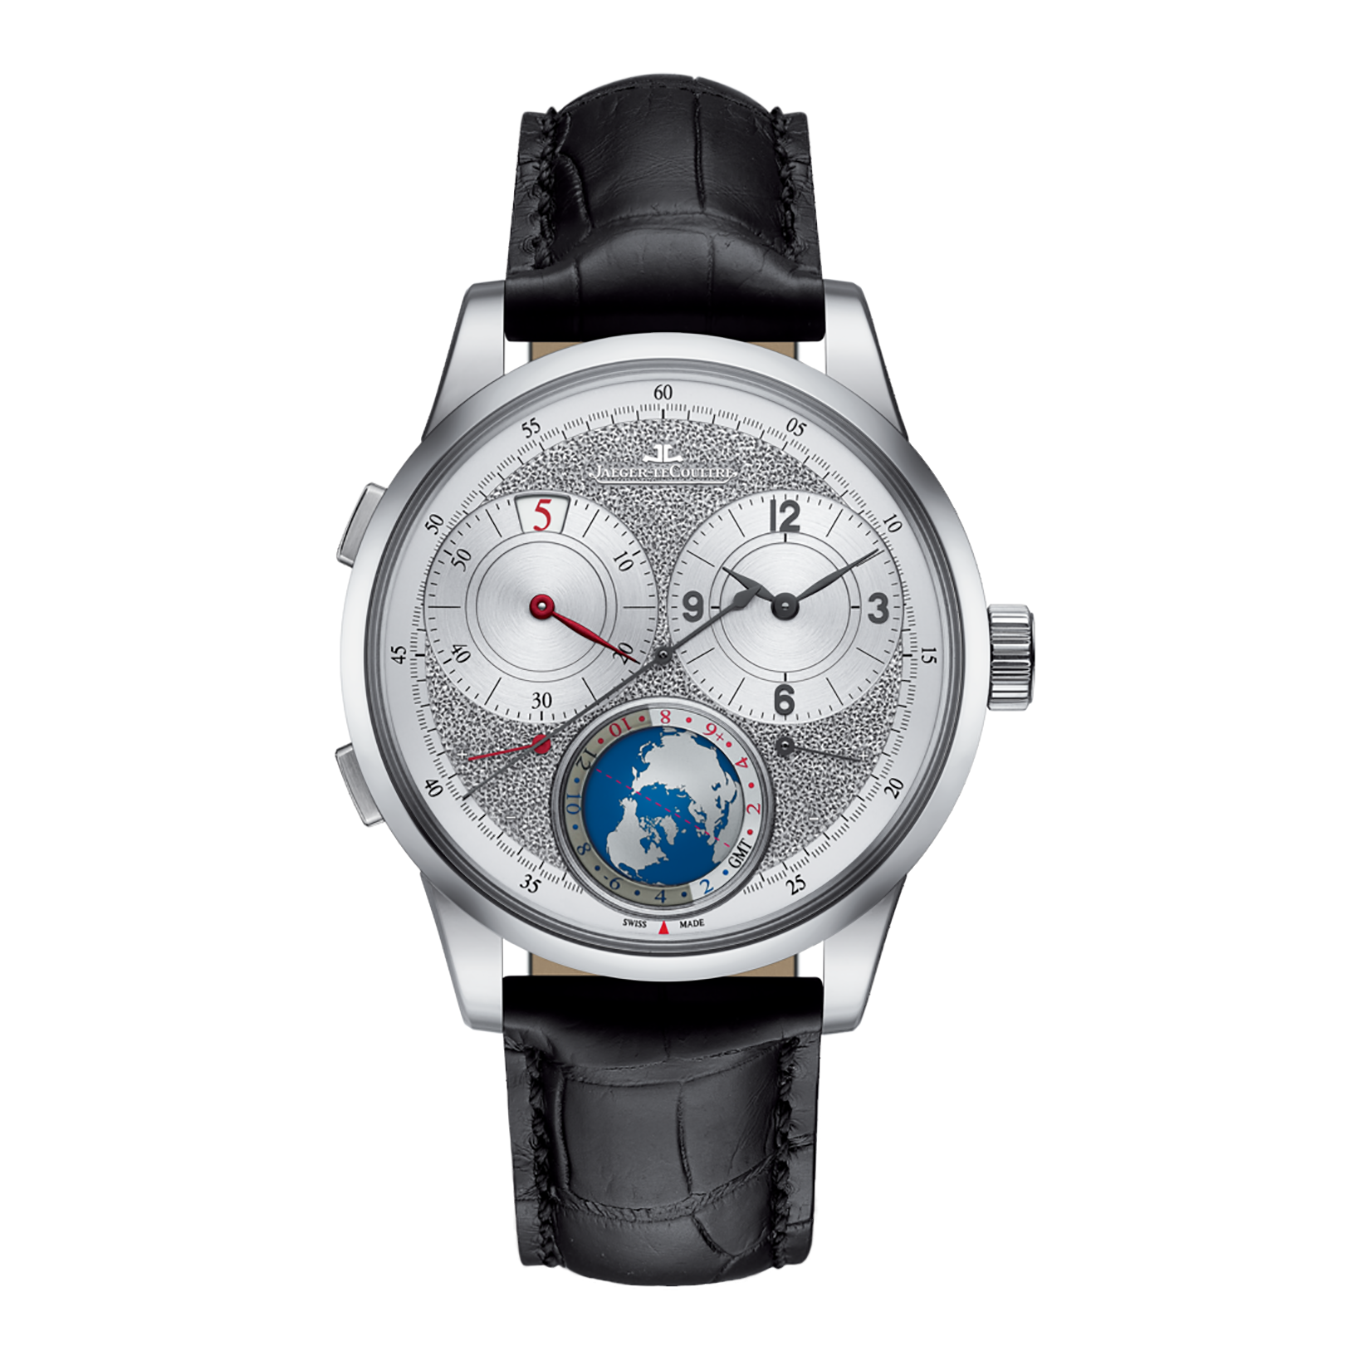 Duomï¿½tre Unique Travel Time on in White Gold on Black Alligator Leather Strap with Silver Dial